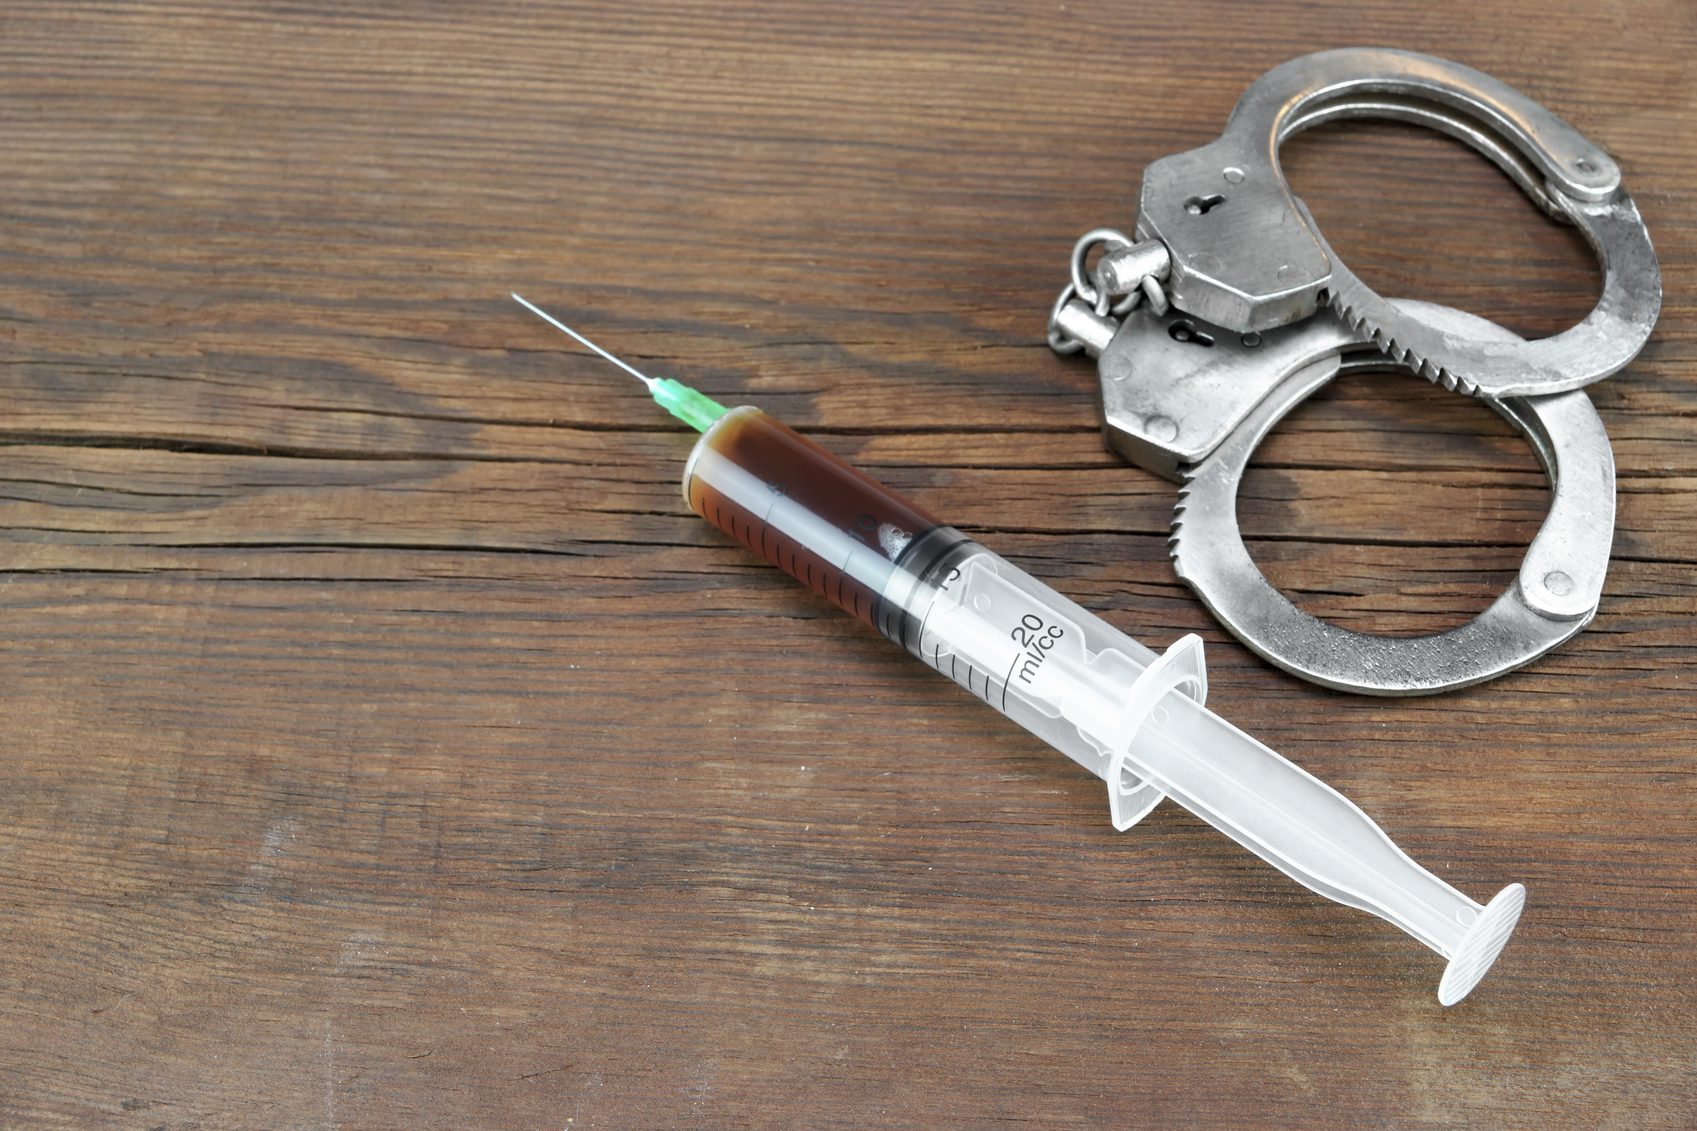 Medical Syringe And Handcuffs On The Wooden Table